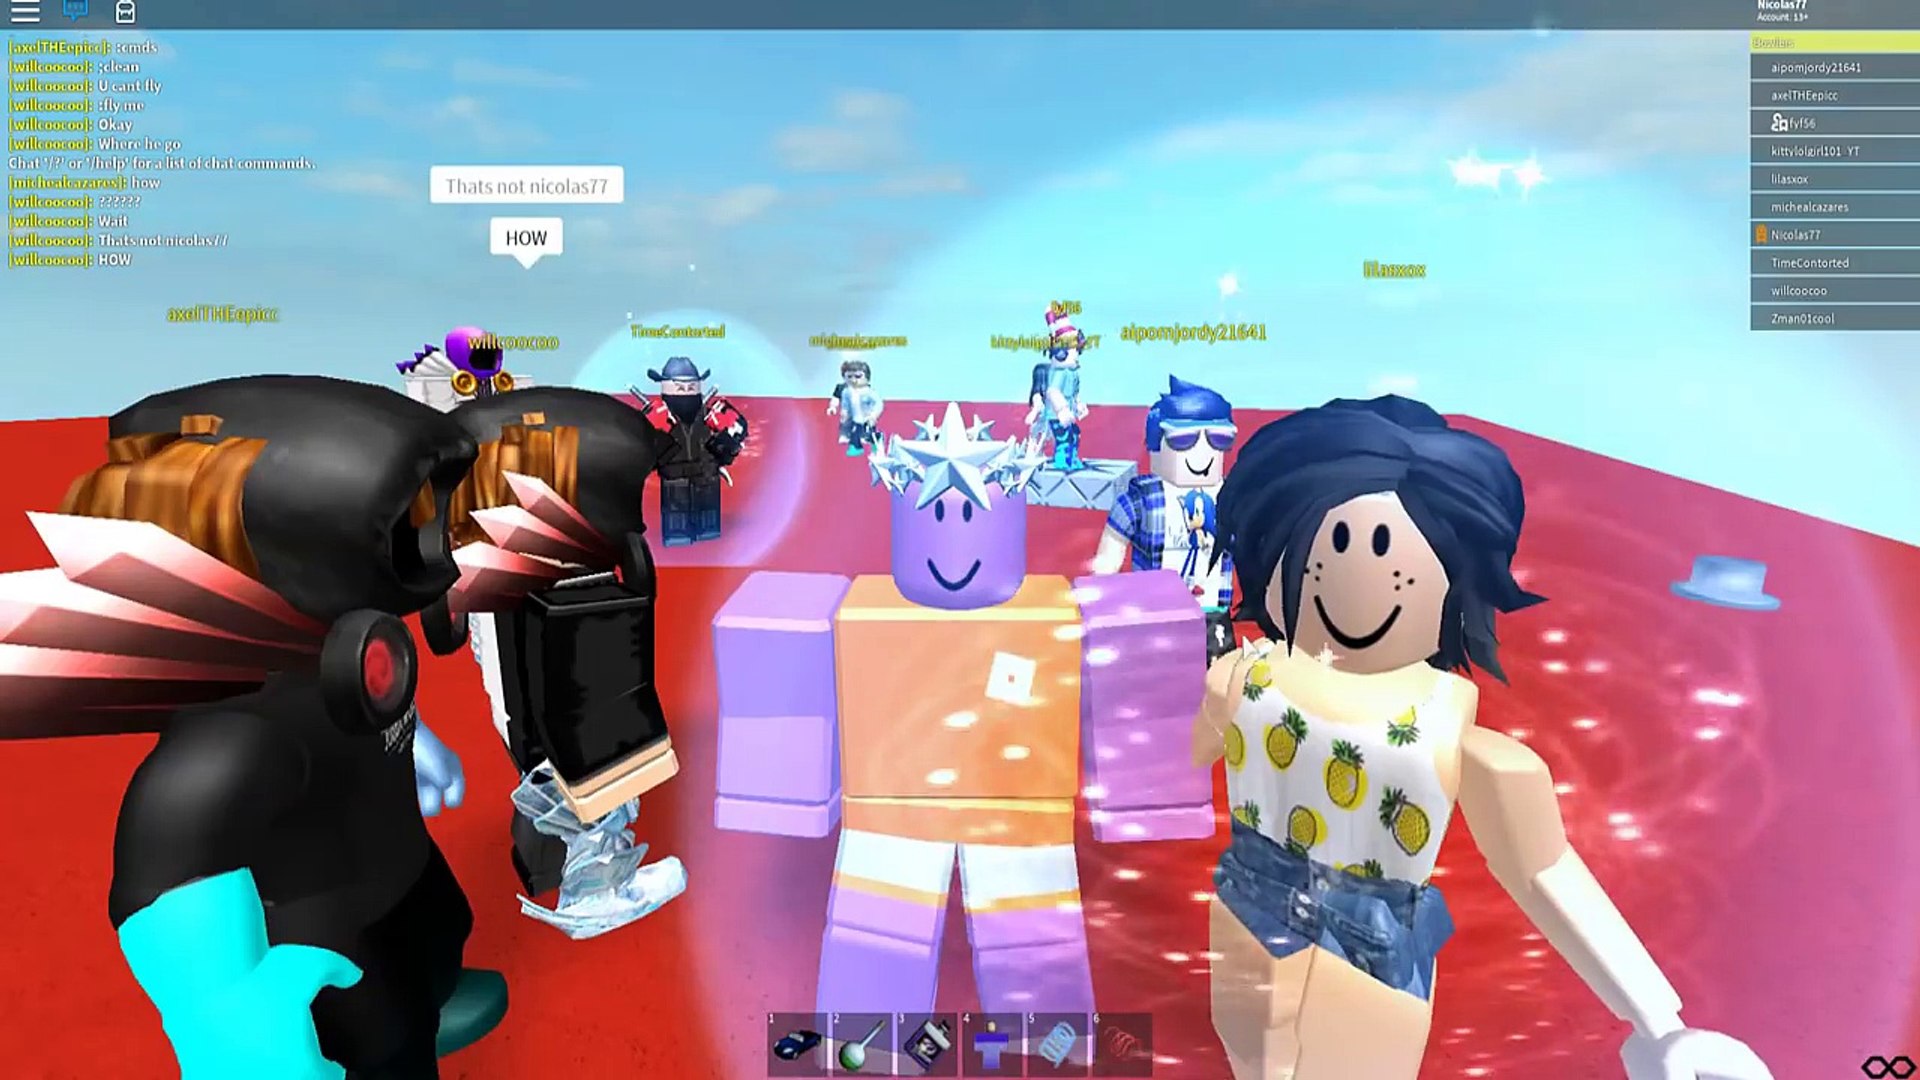 I Gave A Noob 10 000 Robux Then This Happened Roblox Dailymotion Video - nicolas77 roblox game